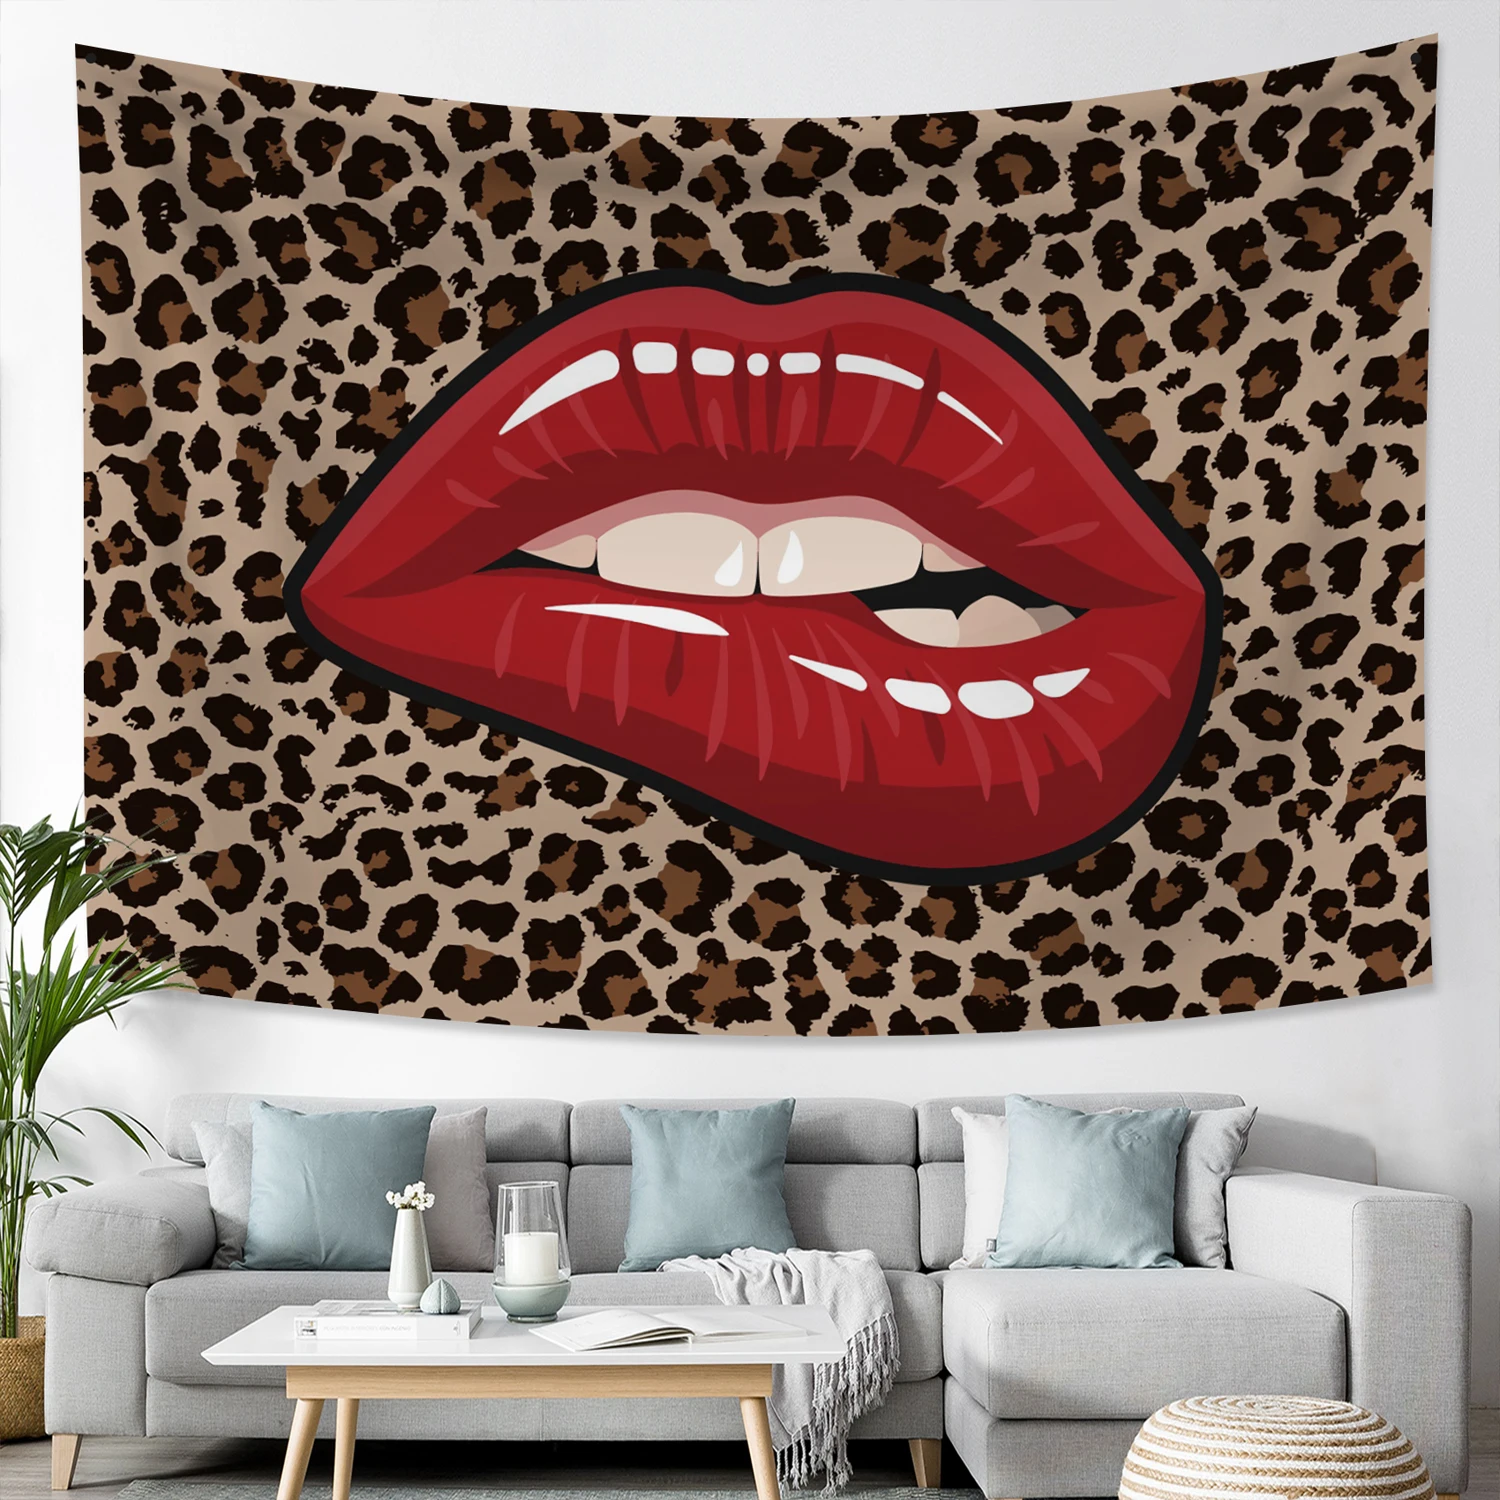 

Tapestry Sexy Biting Lips Home Decor Tapestry Wall Hanging for Bedroom Living Room Dorm, 60WX40H Inches, 37Wx27H Inches